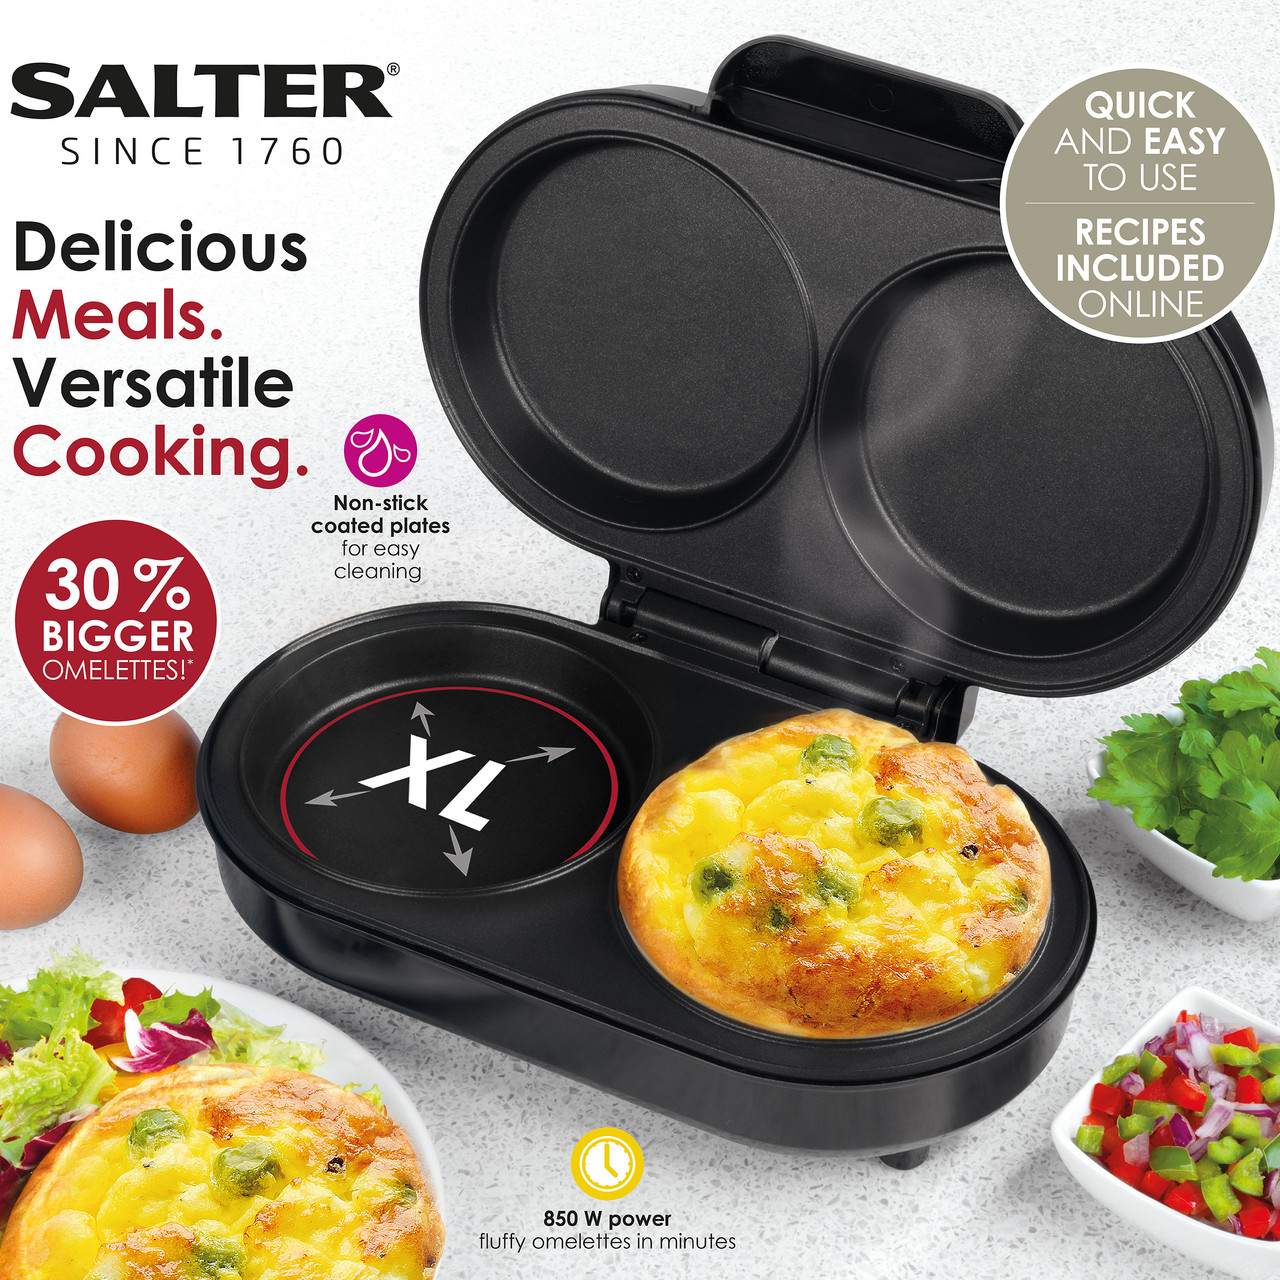 Innovations: Electric Omelette Maker - A delicious breakfast in minutes!